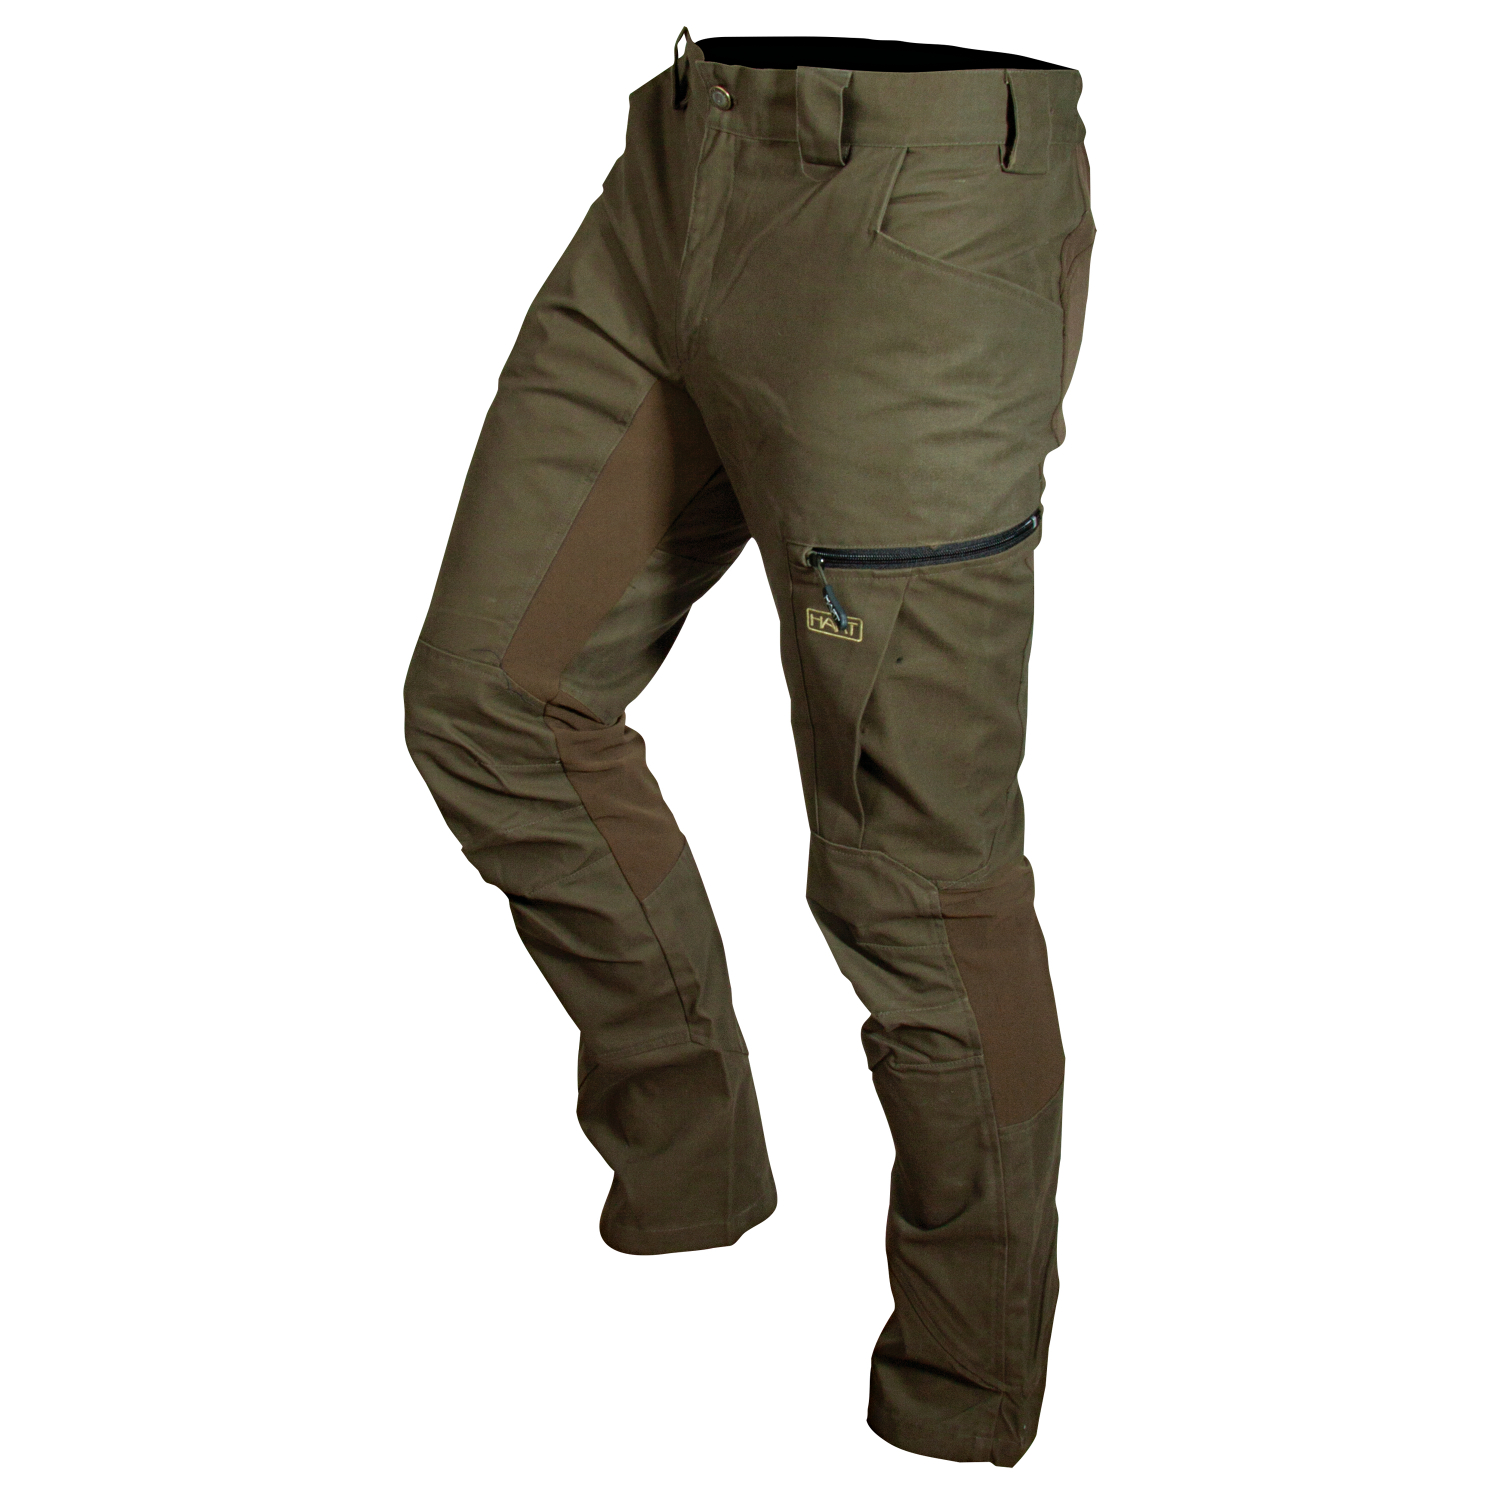 The Ysento Men's Hiking Pants Are an Amazon Must-have